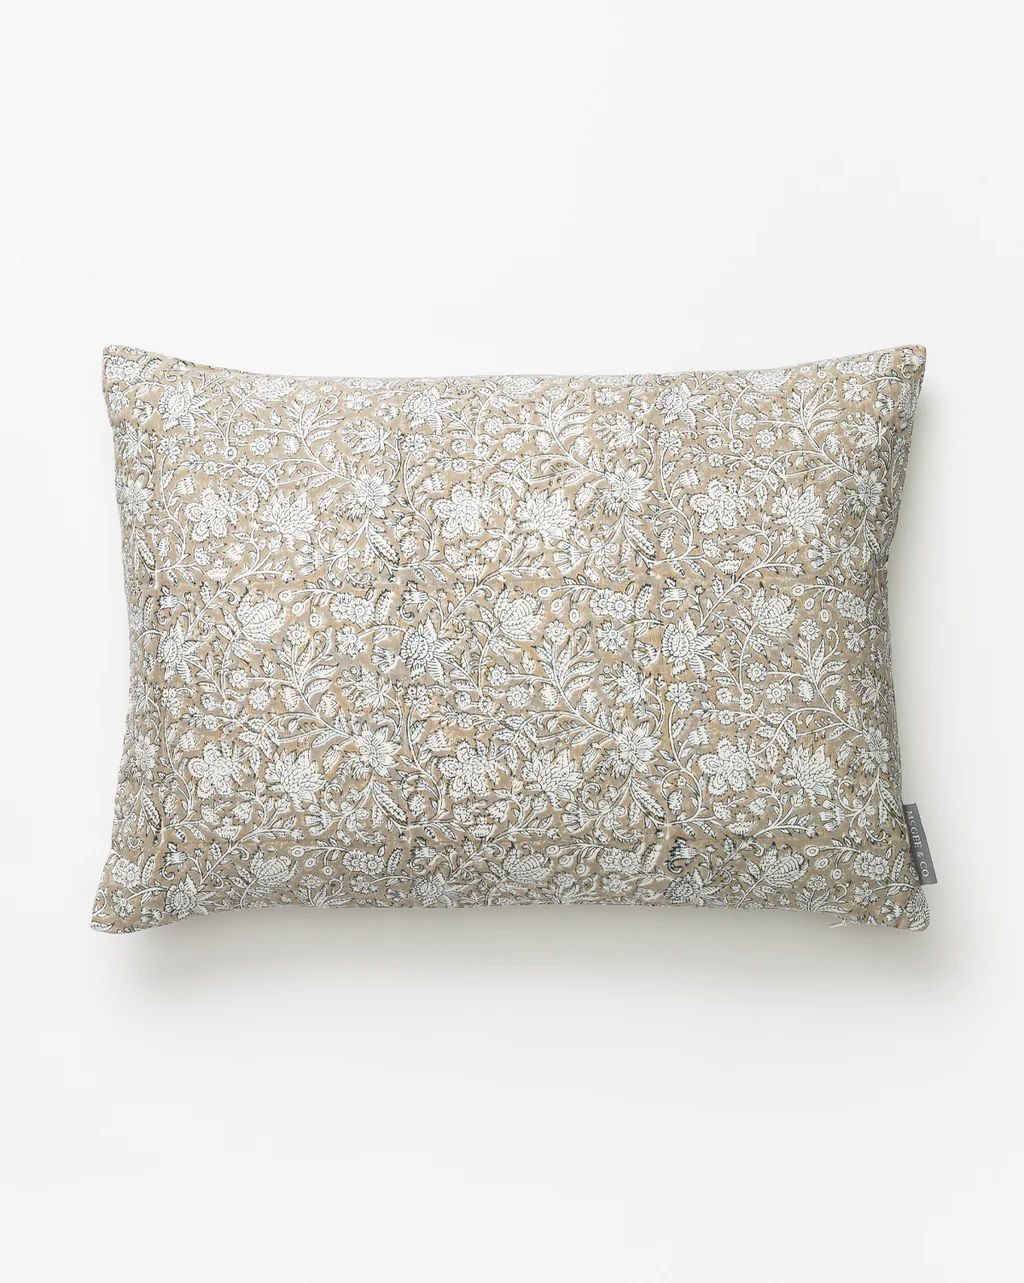 Mira Pillow Cover | McGee & Co.